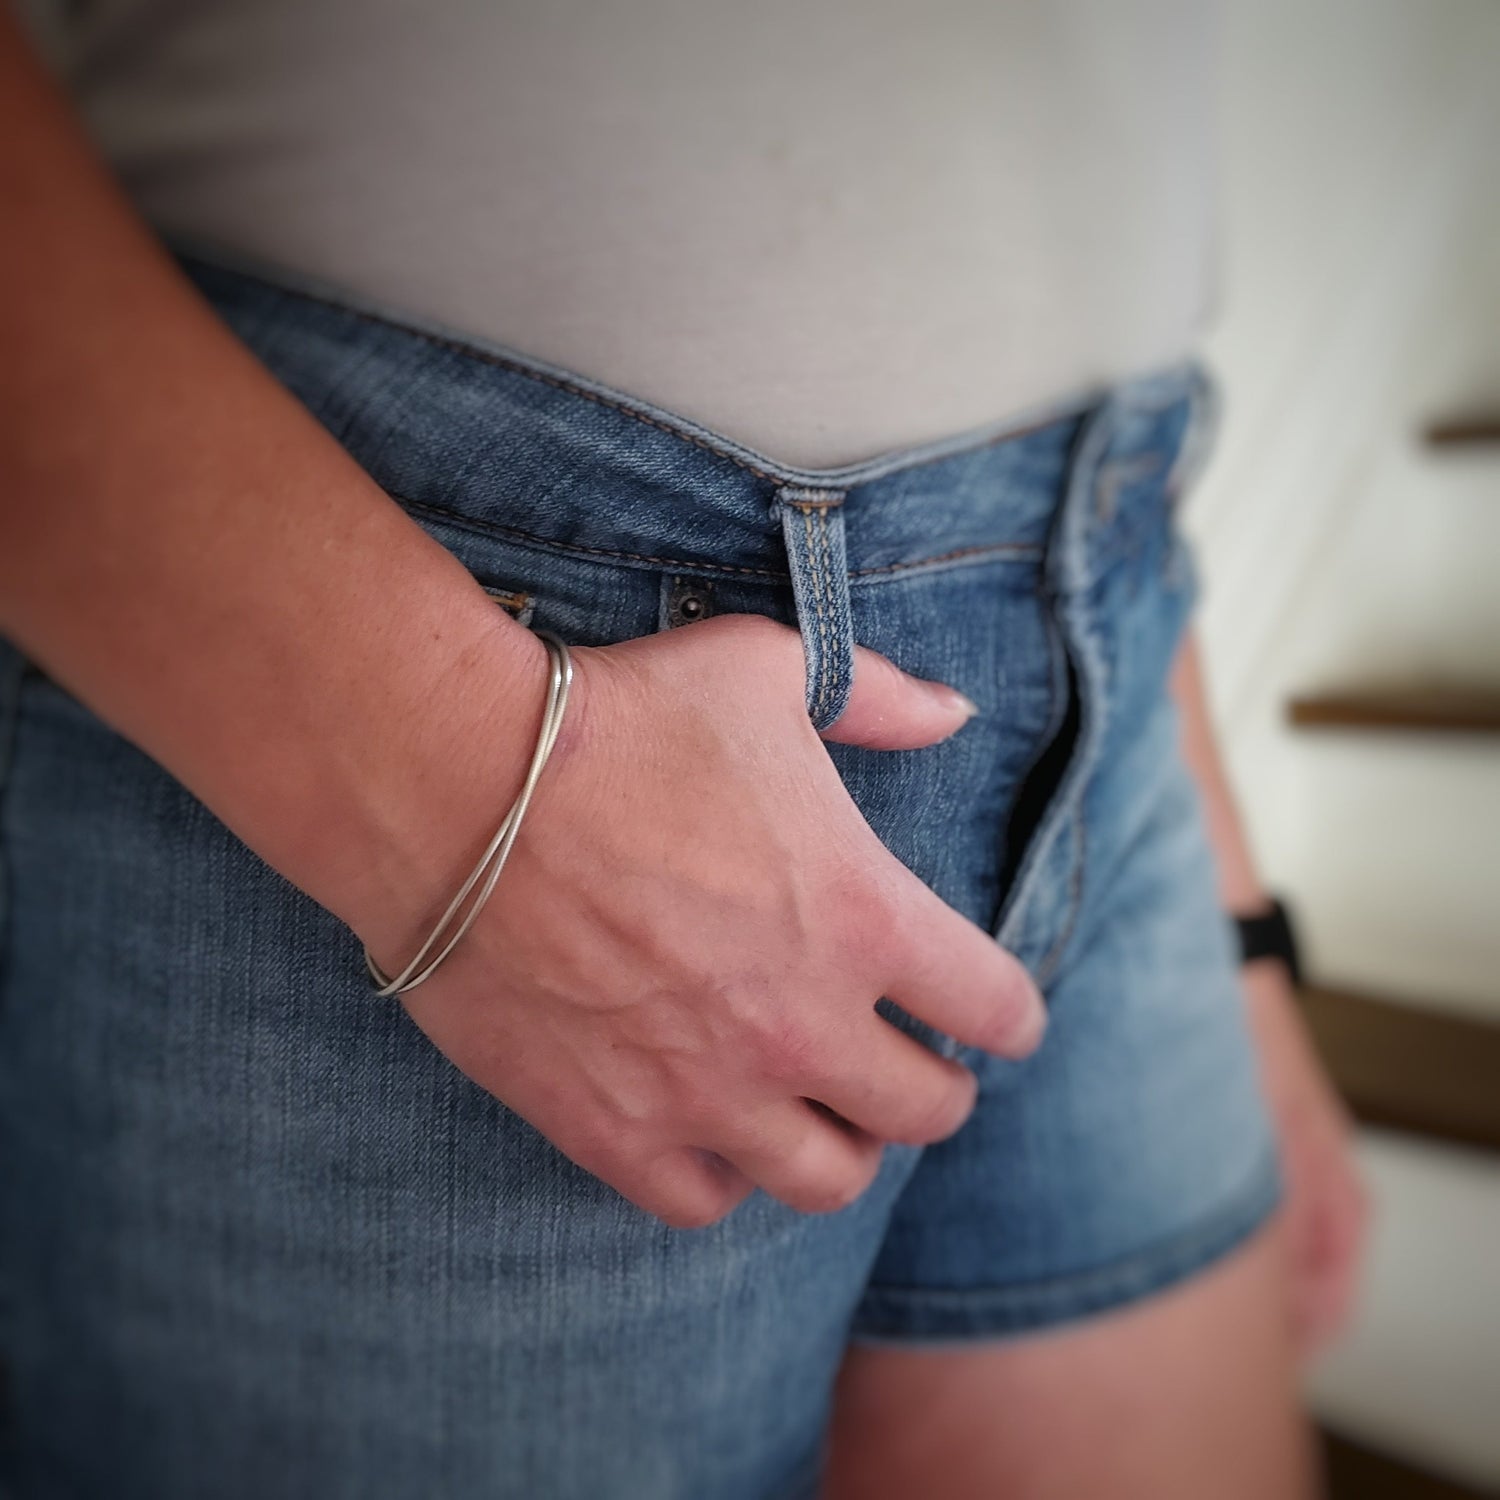 woman's arm and hand, her thumb is hooked into the loop of her jean shorts we see part of her white tshirt - on her wrist she is wearing a silver coloured clasp style bracelet made from upcycled upright bass strings